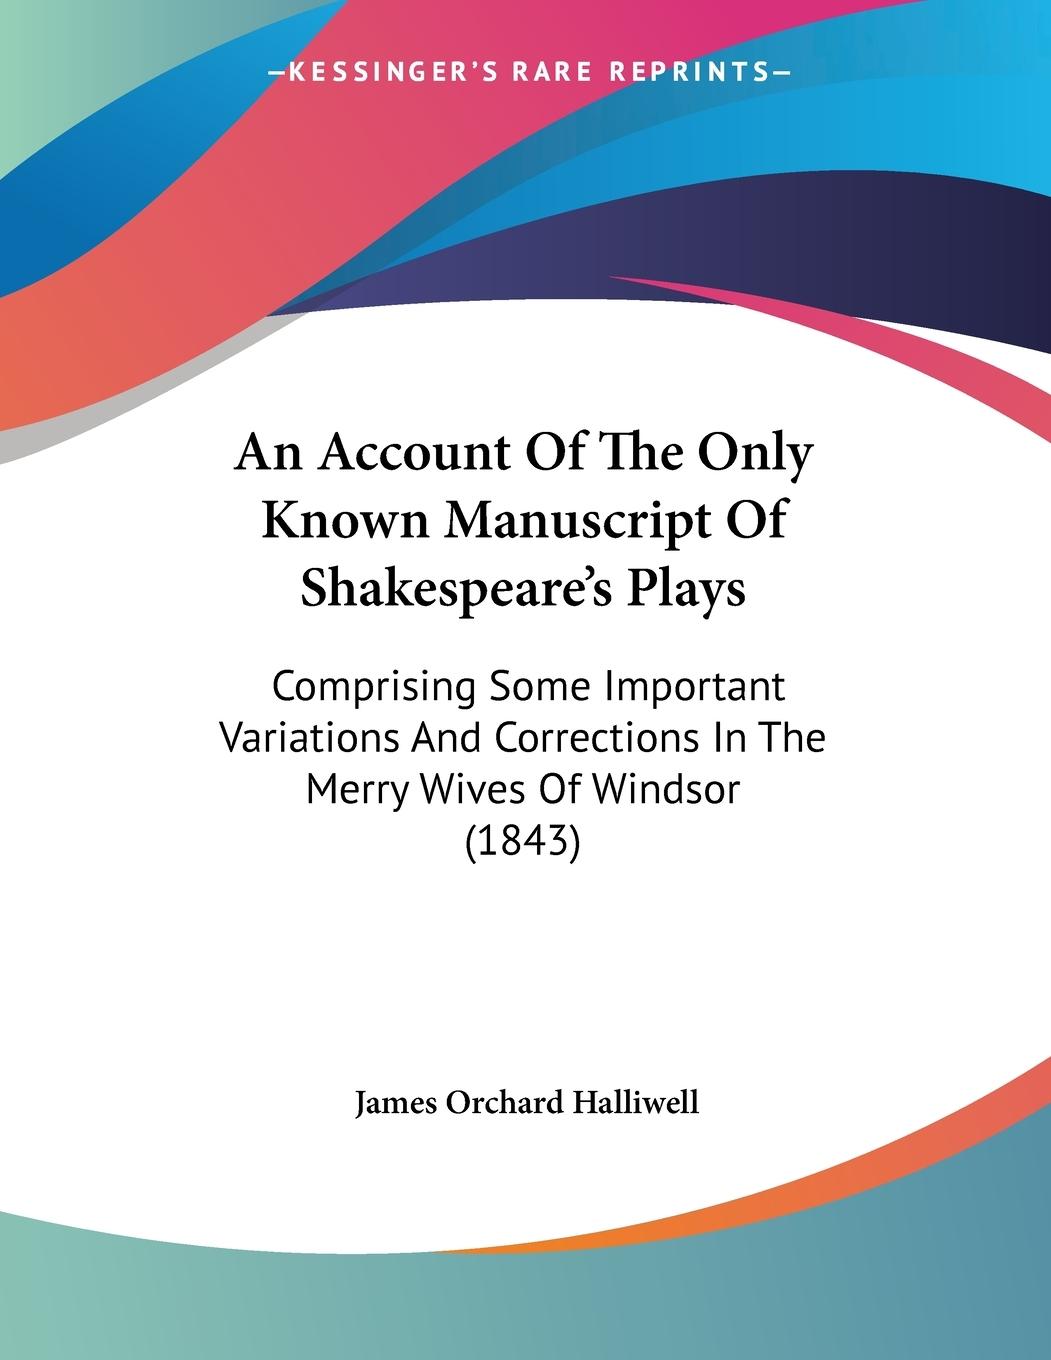 An Account Of The Only Known Manuscript Of Shakespeare s Plays - Halliwell, James Orchard